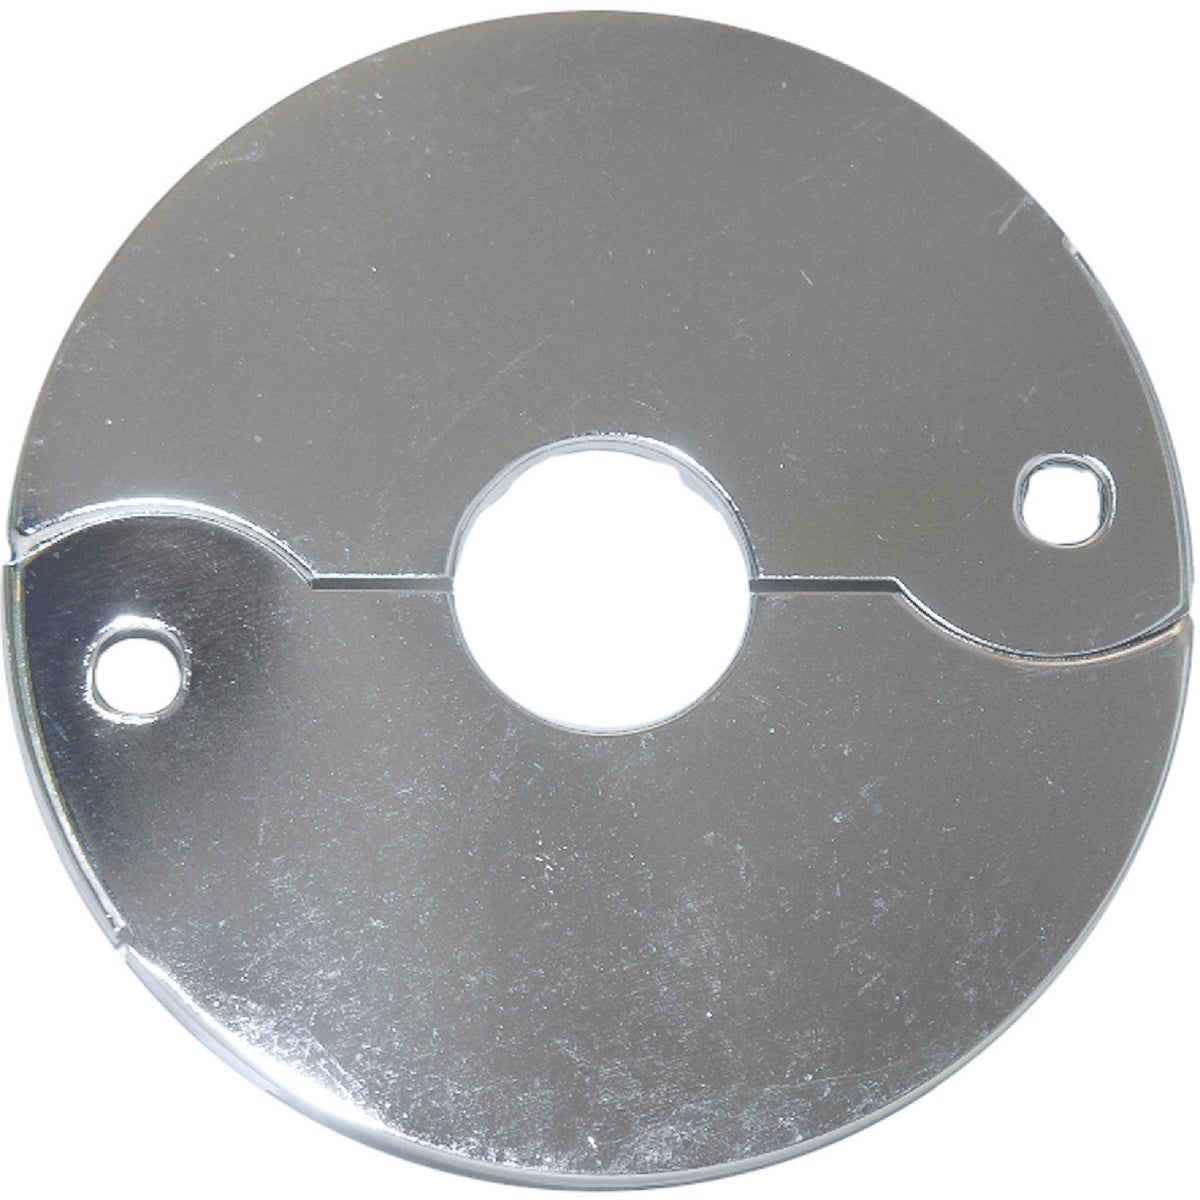 Lasco Chrome-Plated 1-1/2 In. IP or 1-7/8 In. ID Split Plate